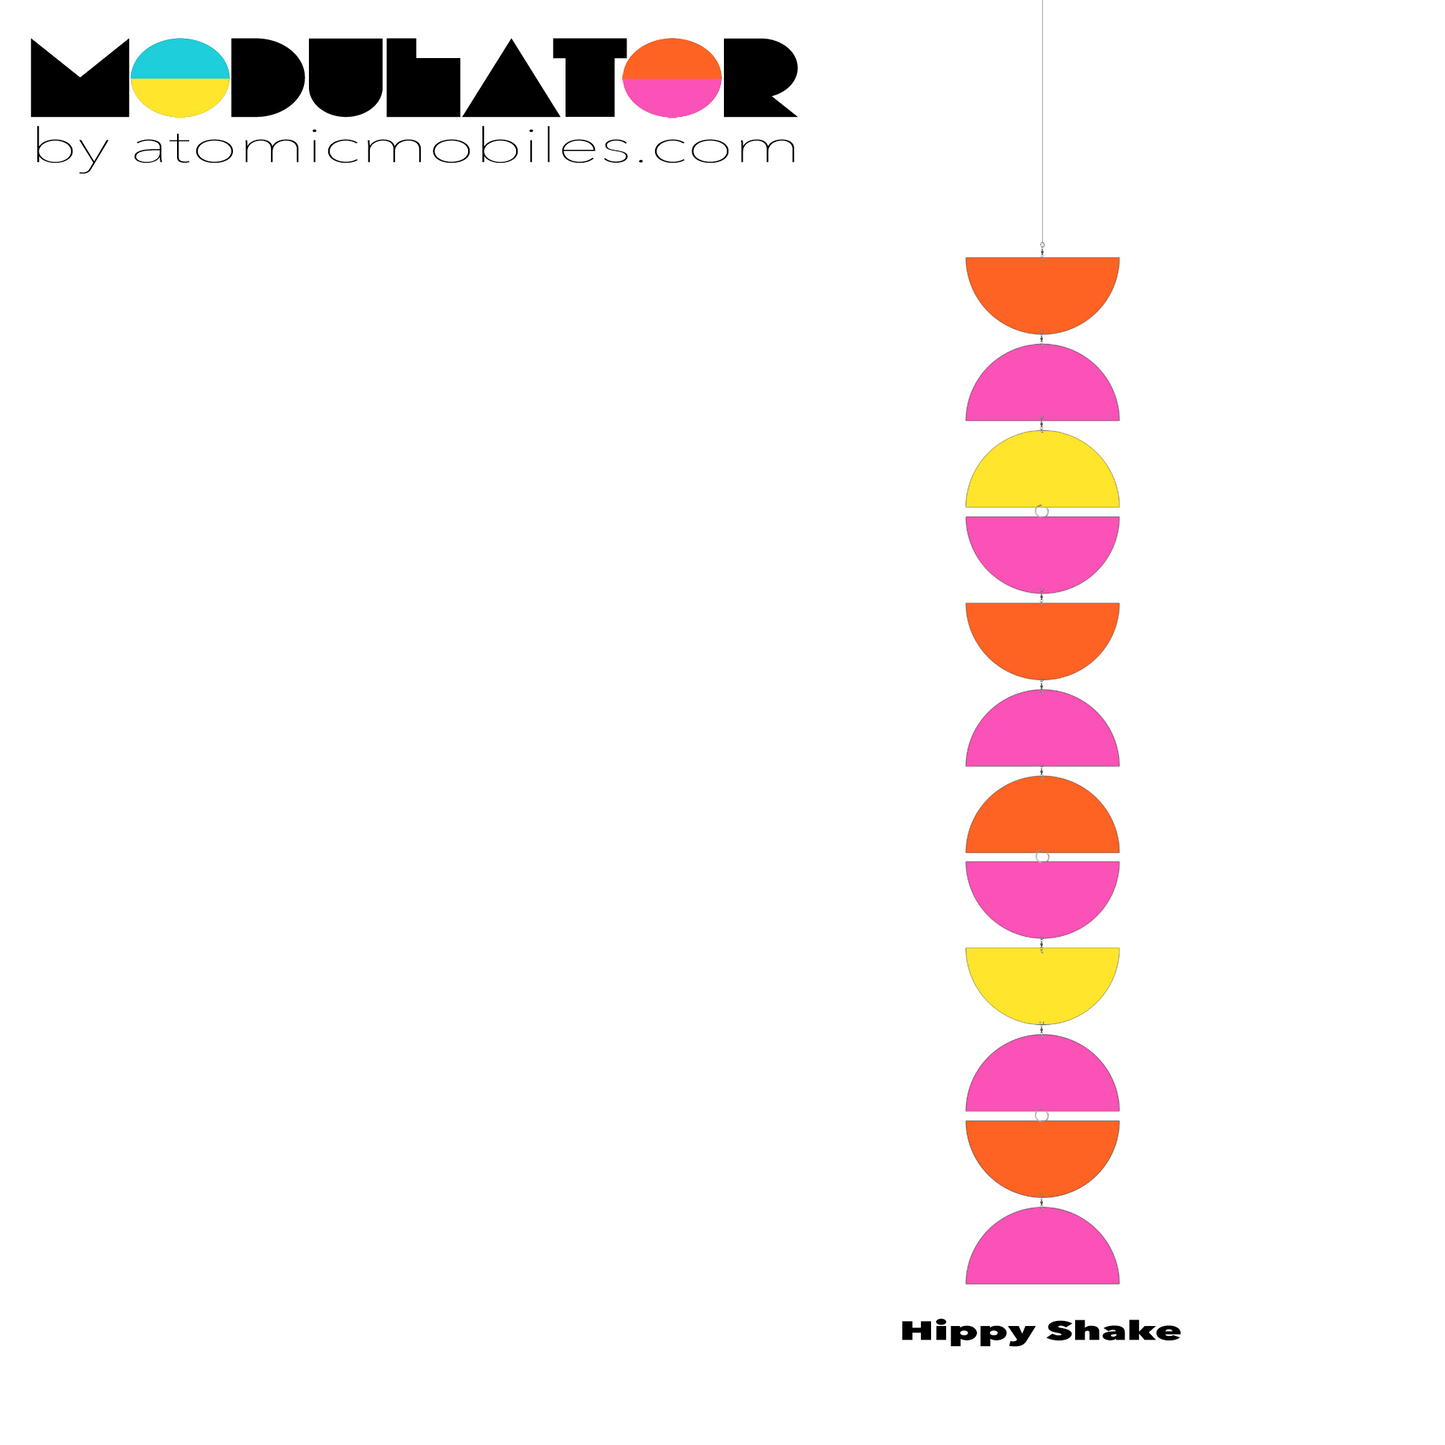 MODulator Vertical Art Mobile - retro mid century modern style hanging art mobile in Hippy Shake colors of Hot Pink, Orange, and Yellow by AtomicMobiles.com